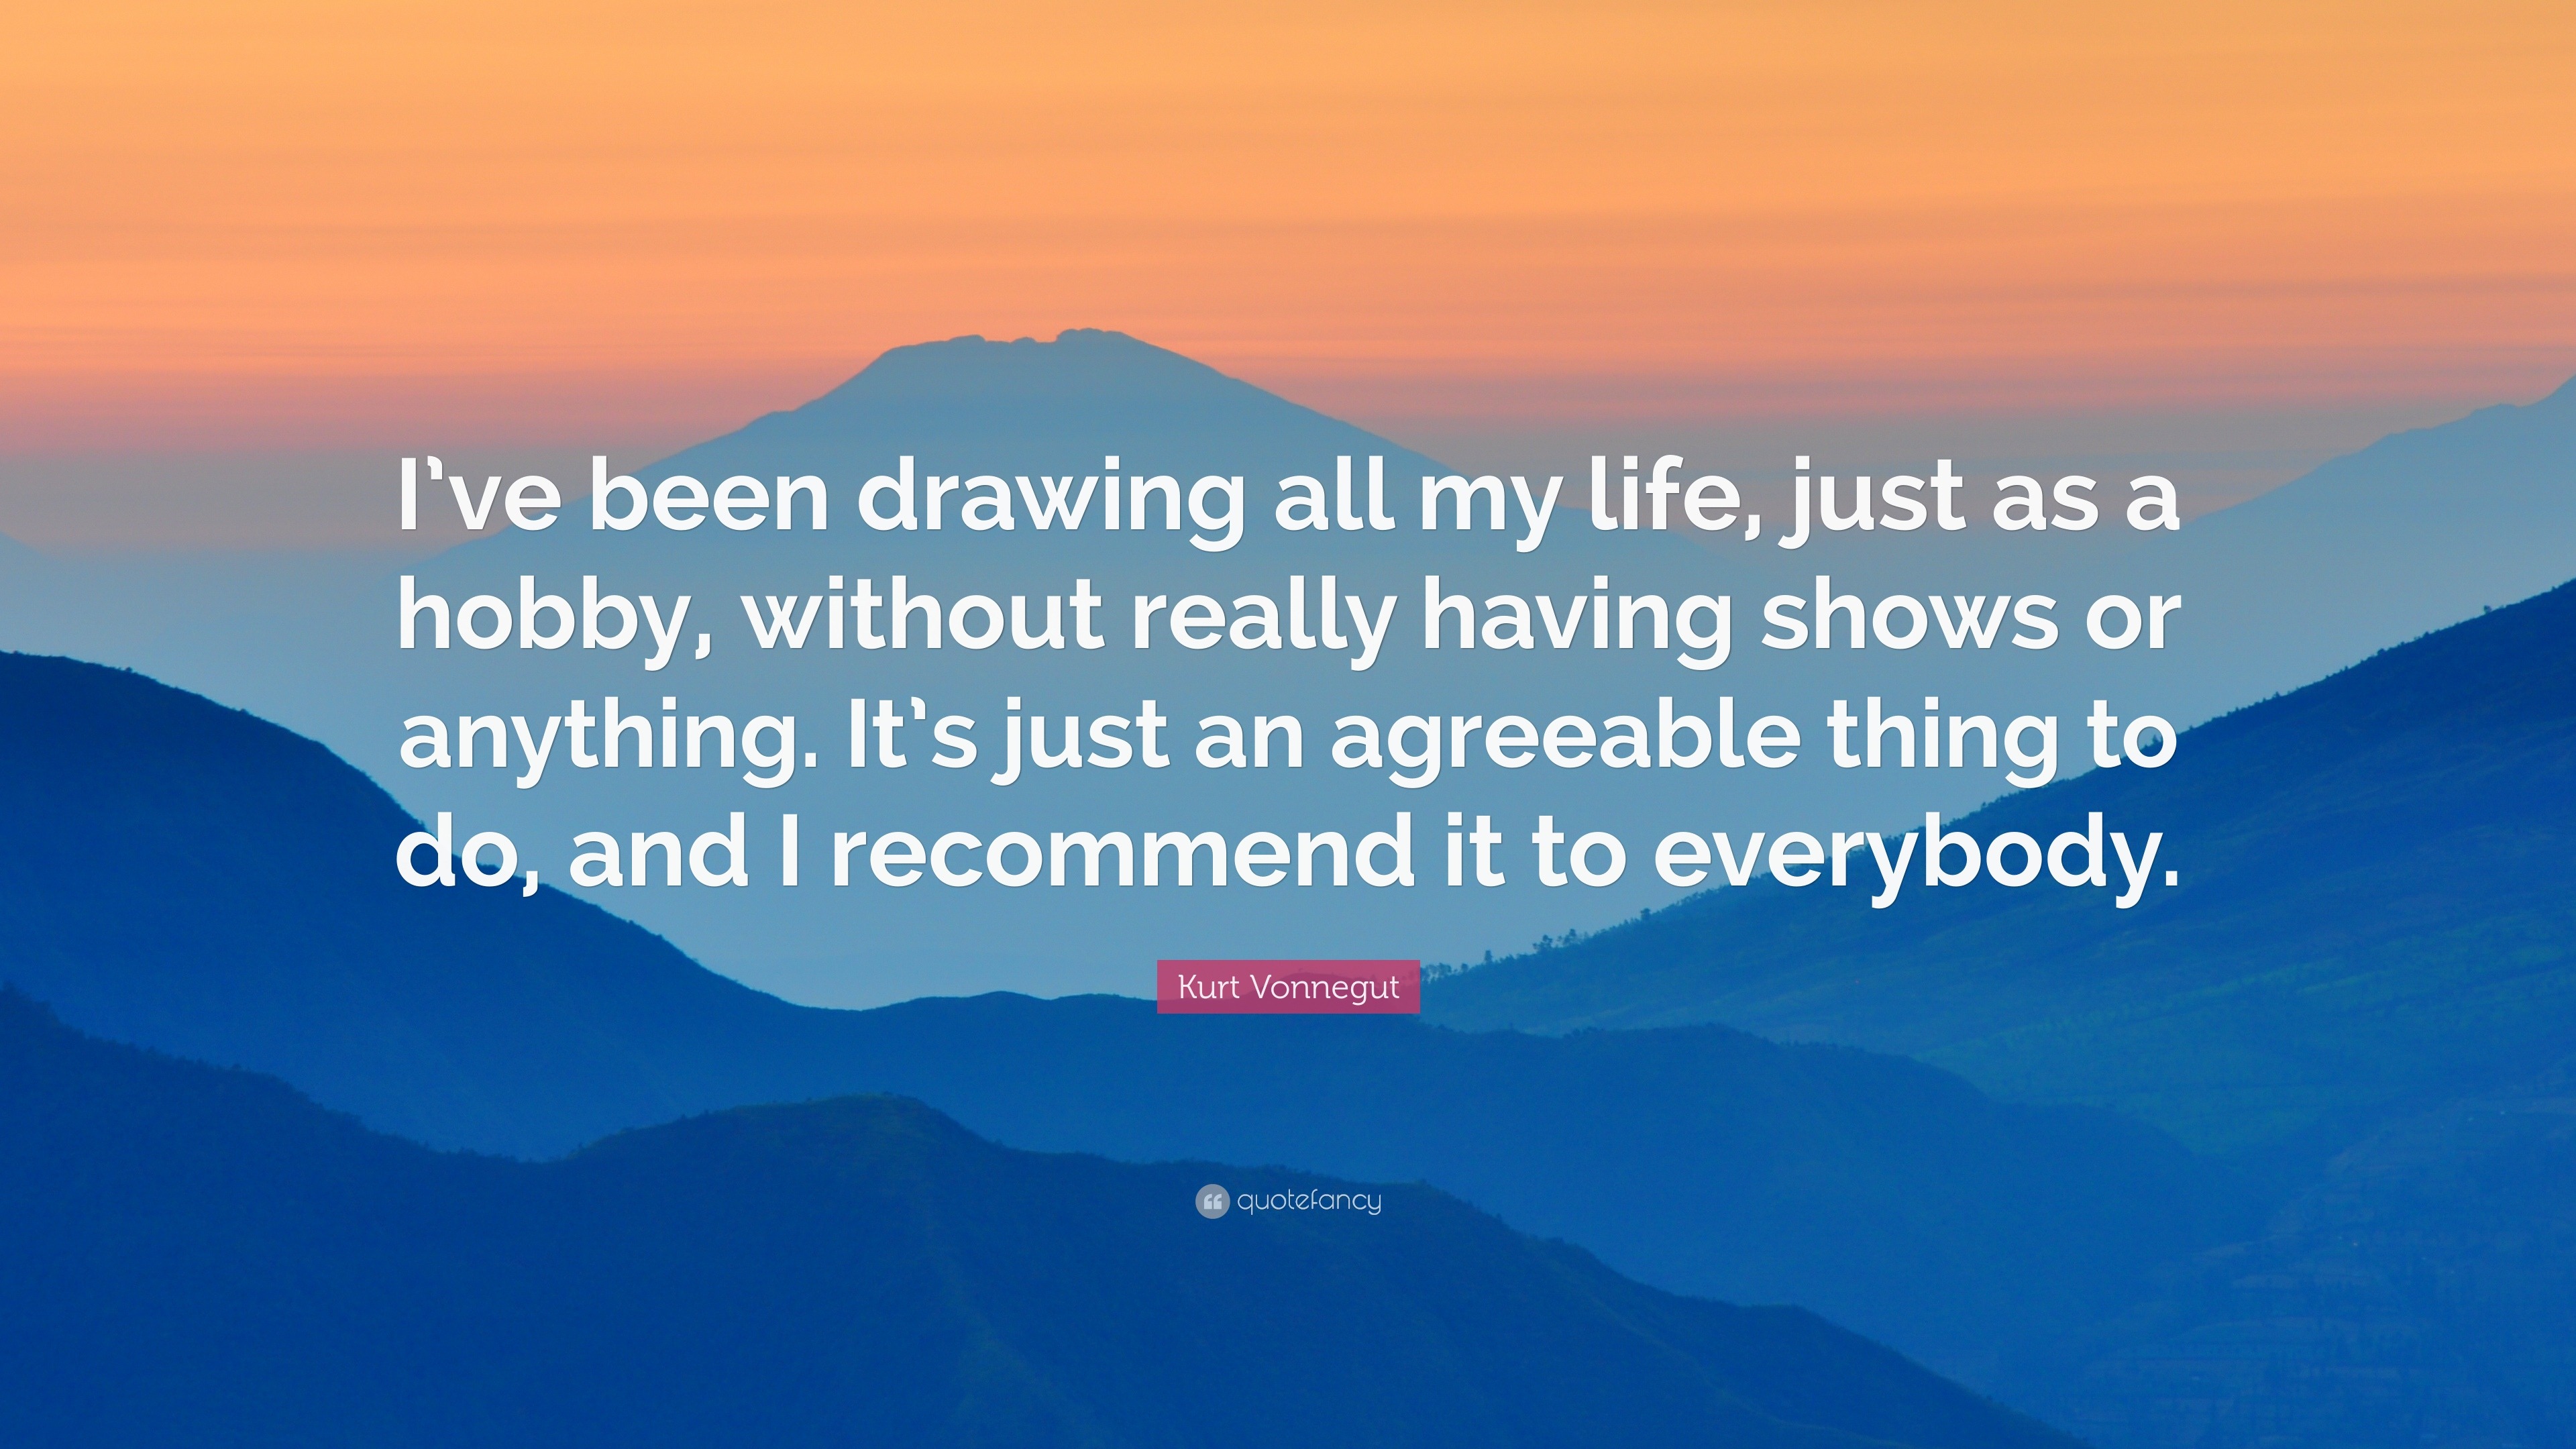 How does drawing as a hobby make a difference to your life? - Quora